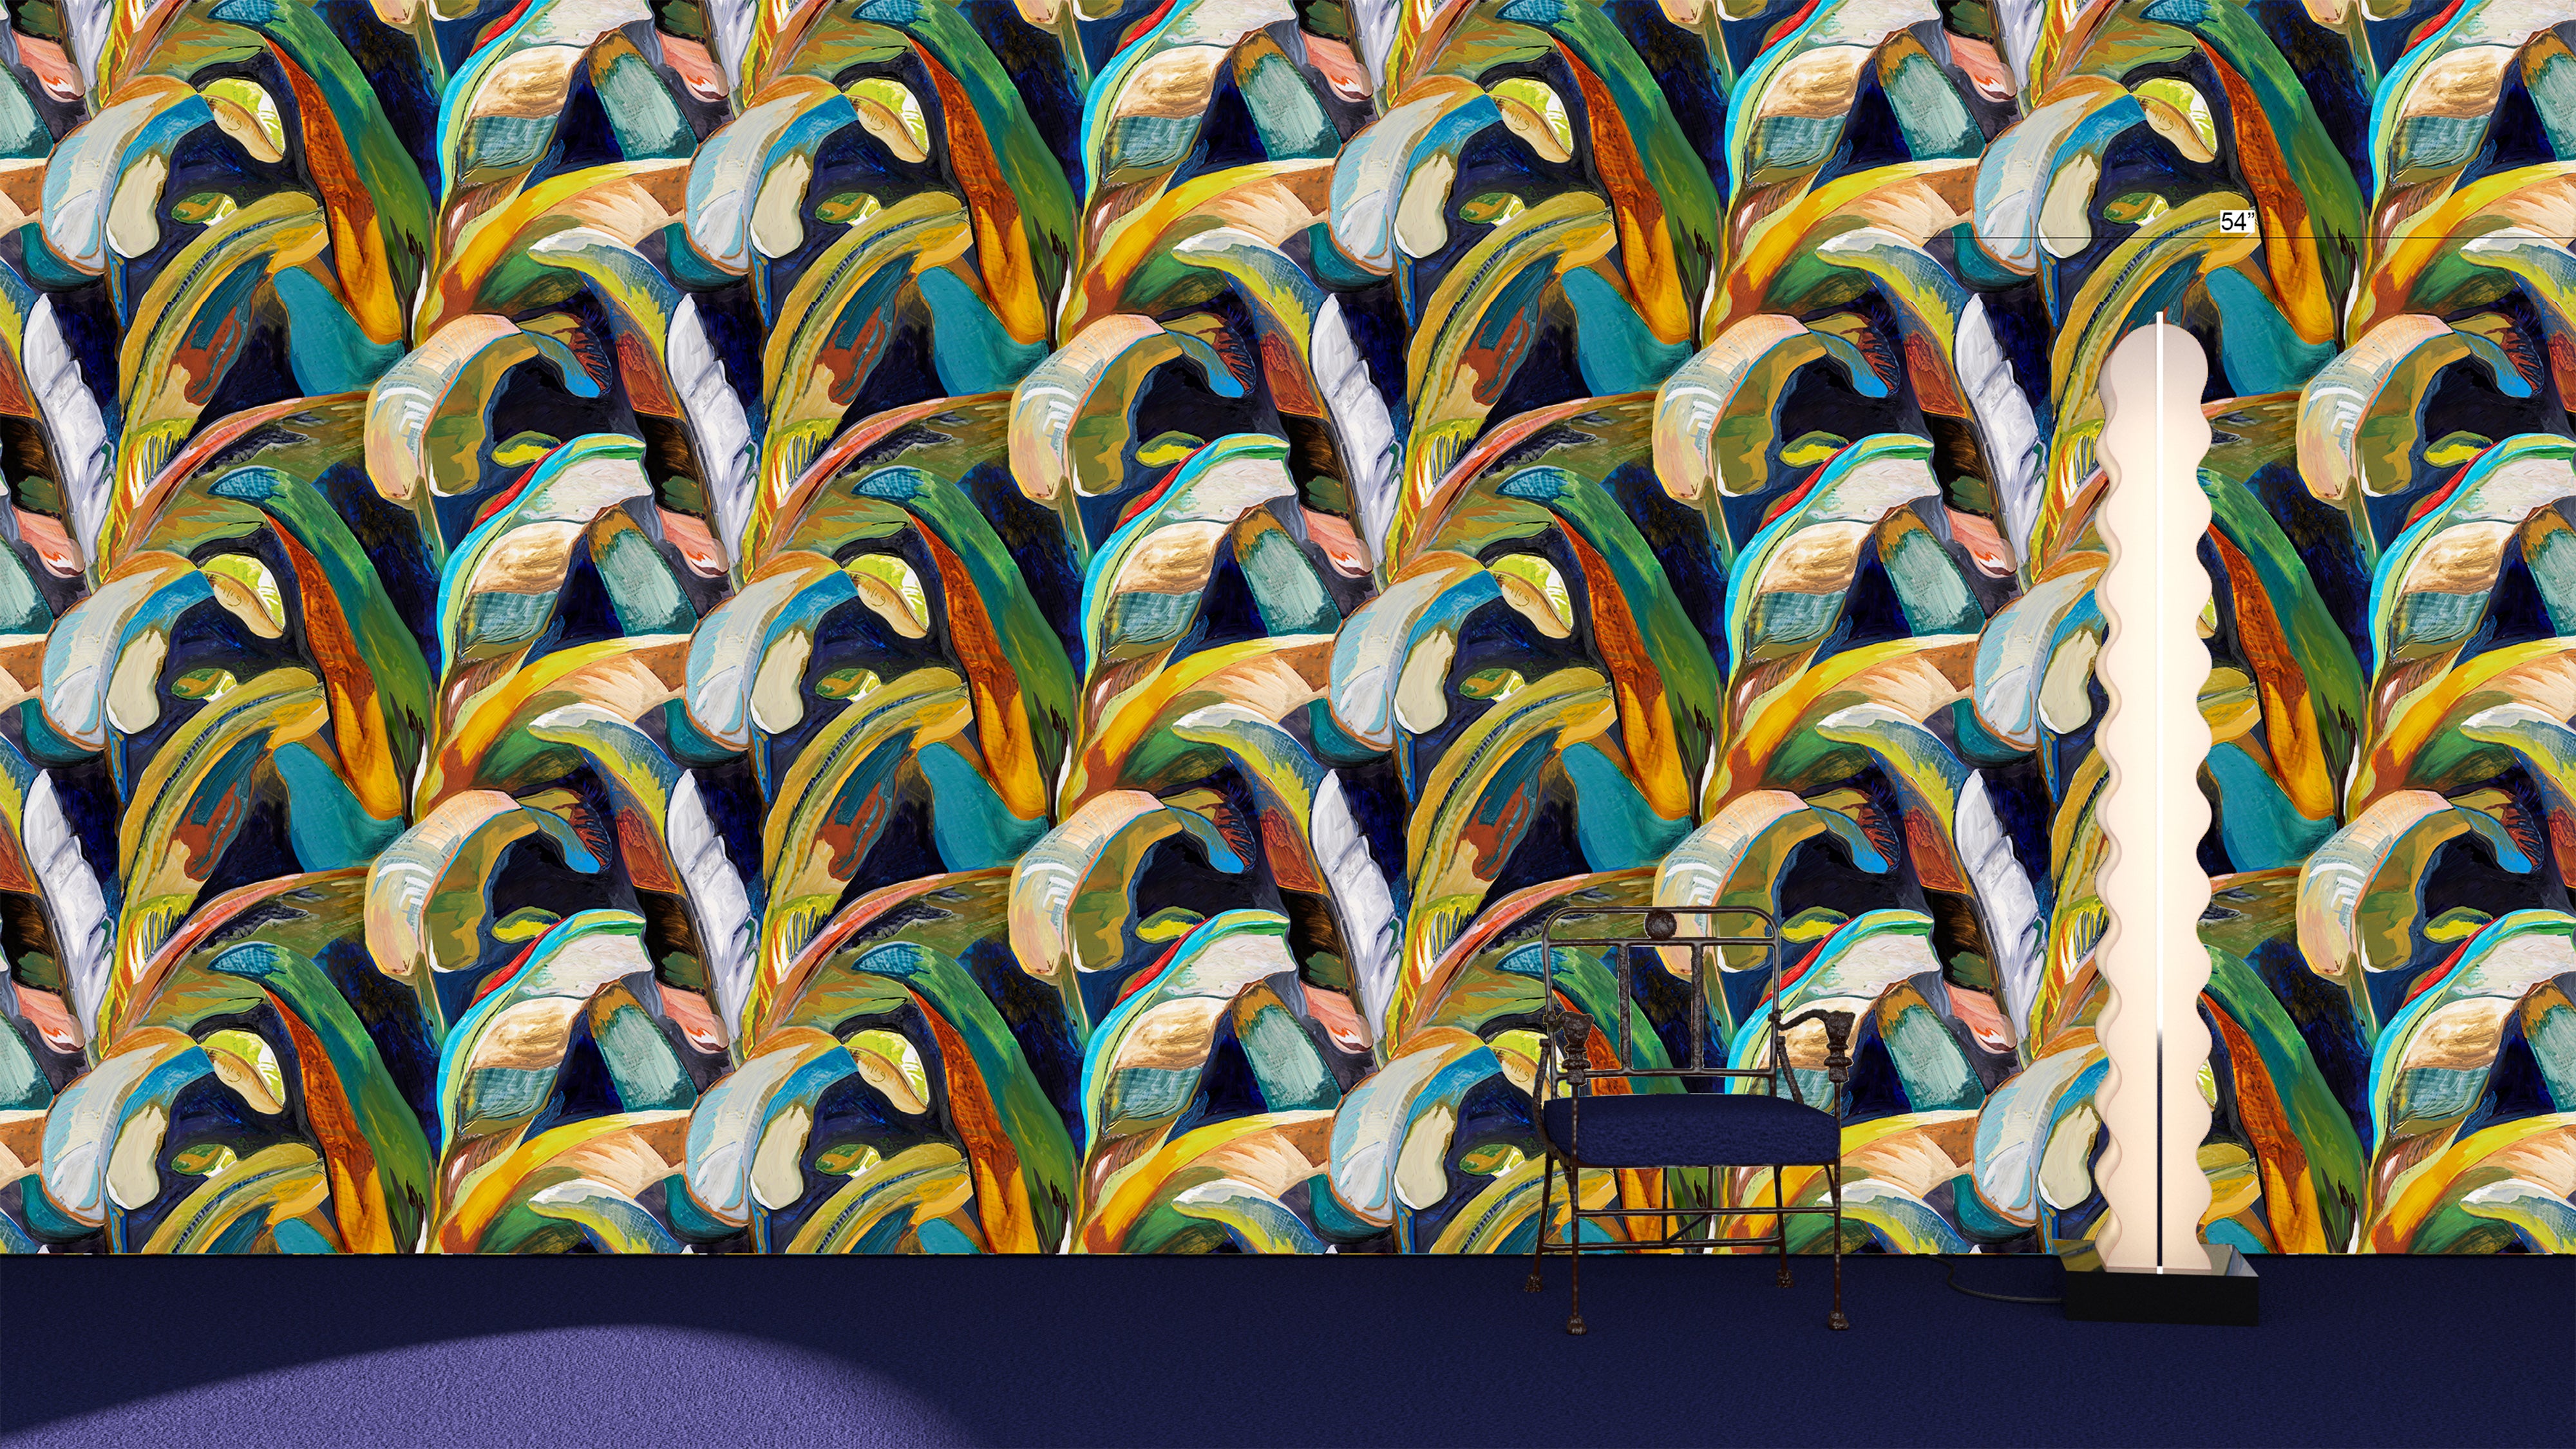 Martinique® Celebration! Werner Wallpaper (x CW Stockwell)